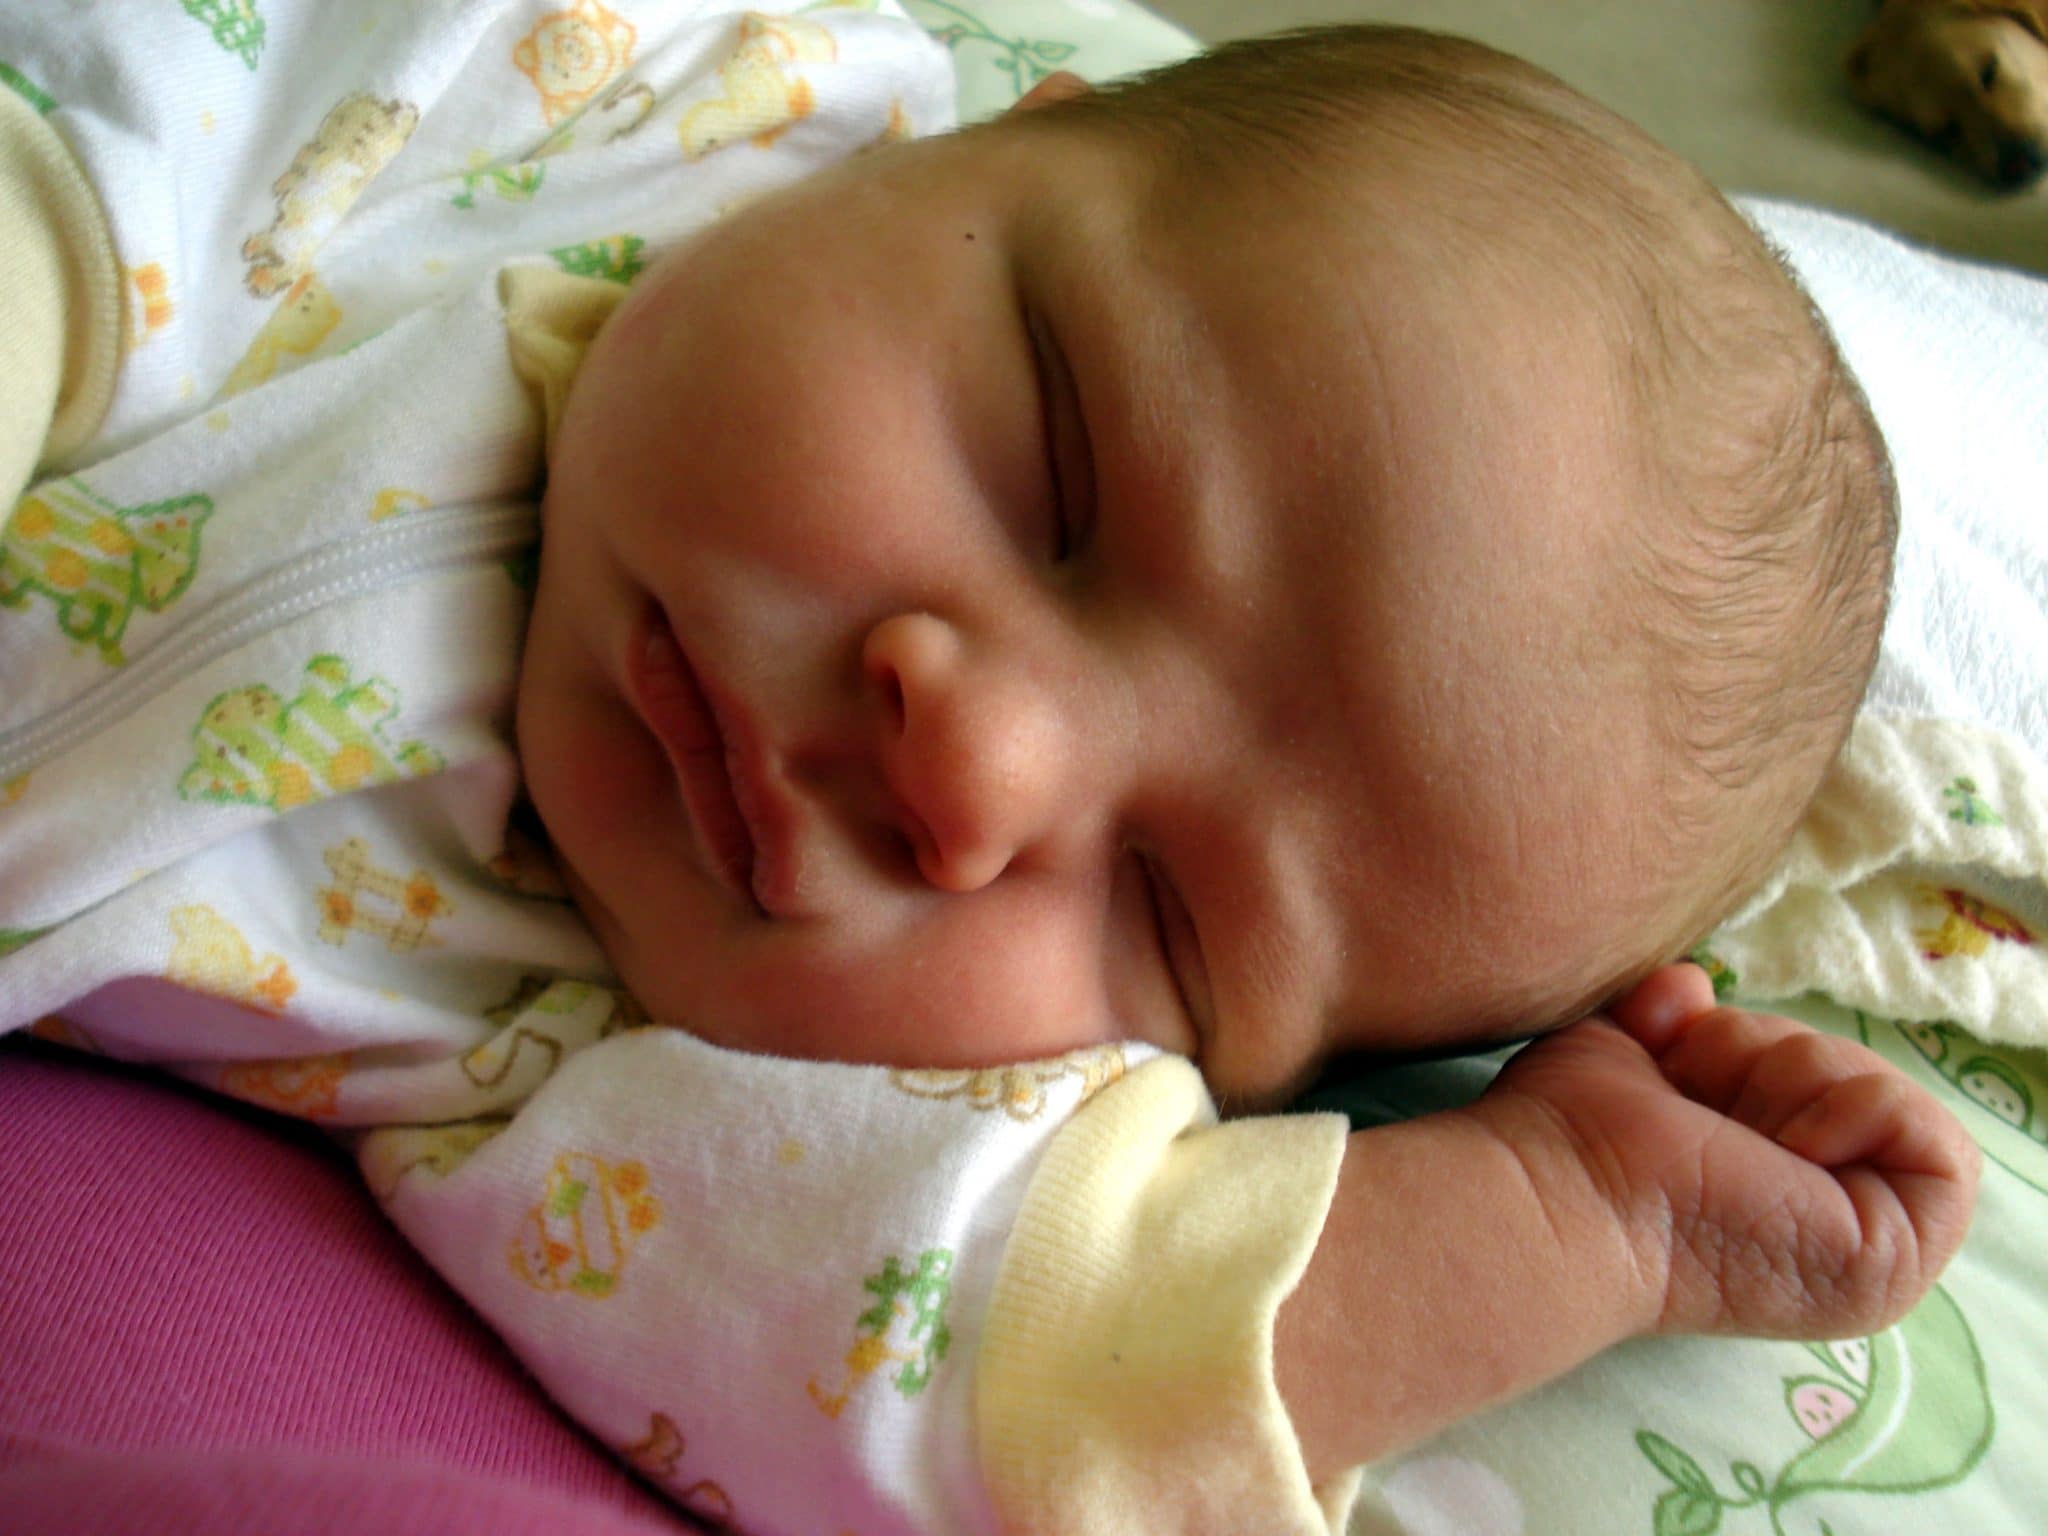 Newborn baby laying on right side